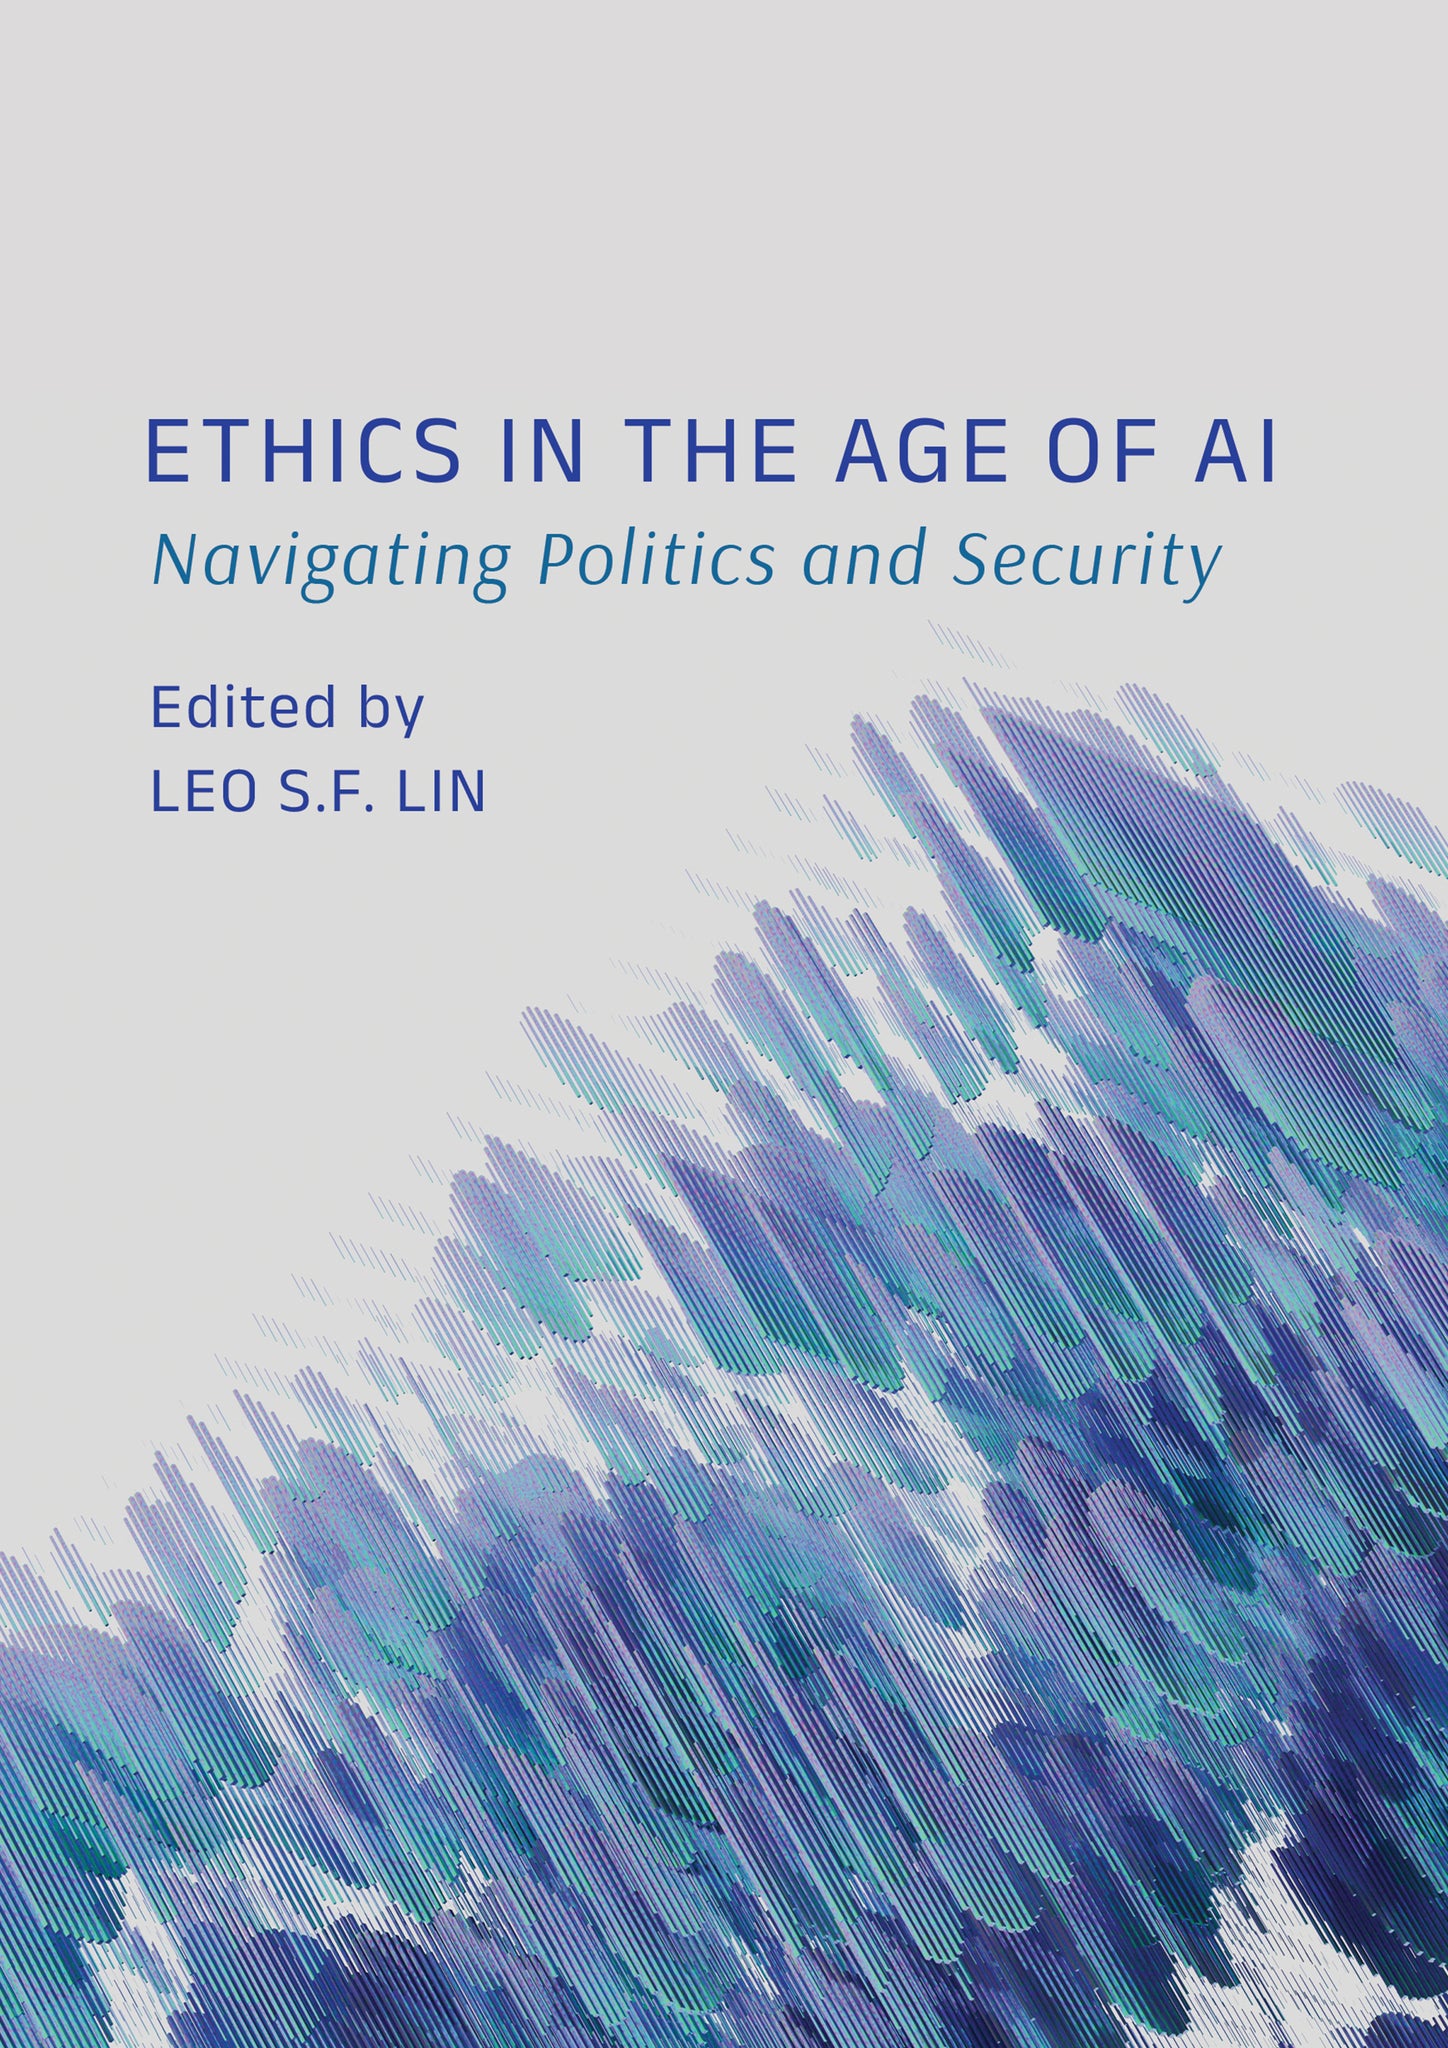 Ethics in the Age of AI: Navigating Politics and Security